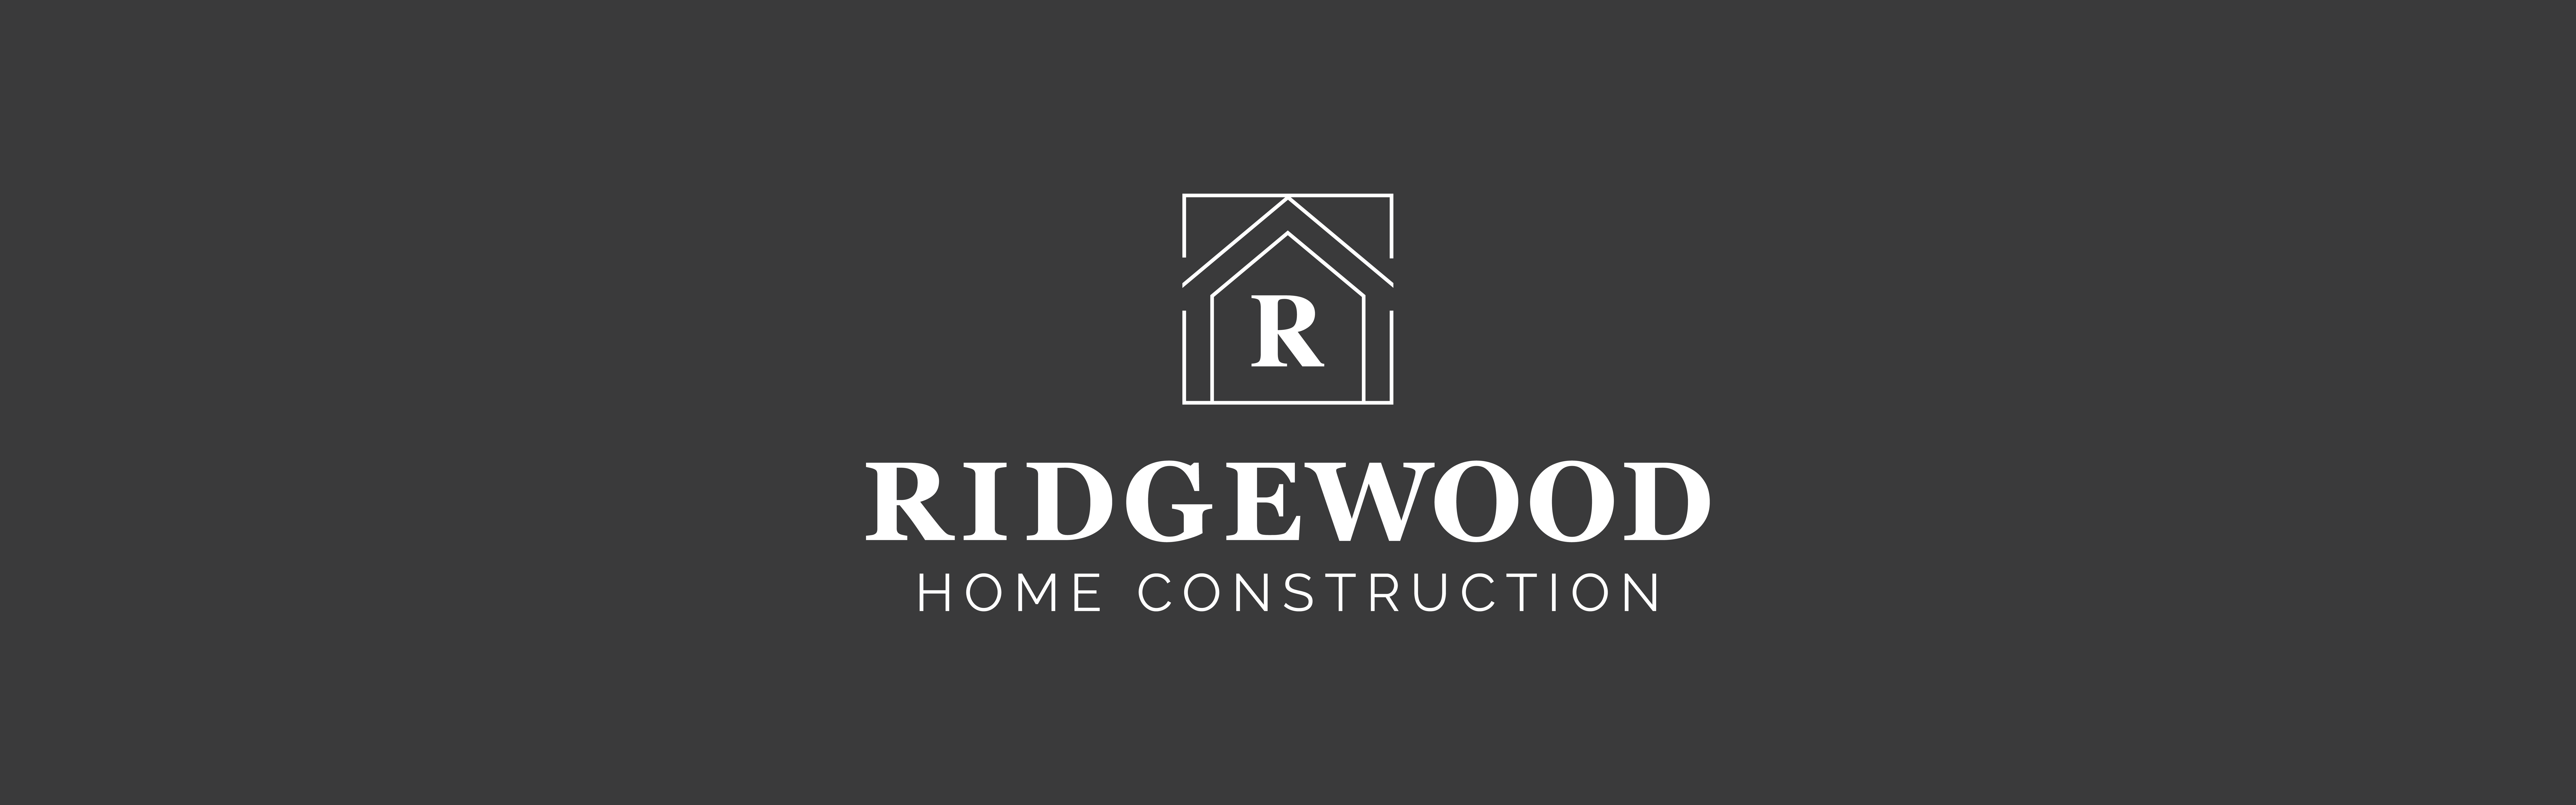 Logo of Ridgewood Home Construction featuring a stylized house icon above the company name.